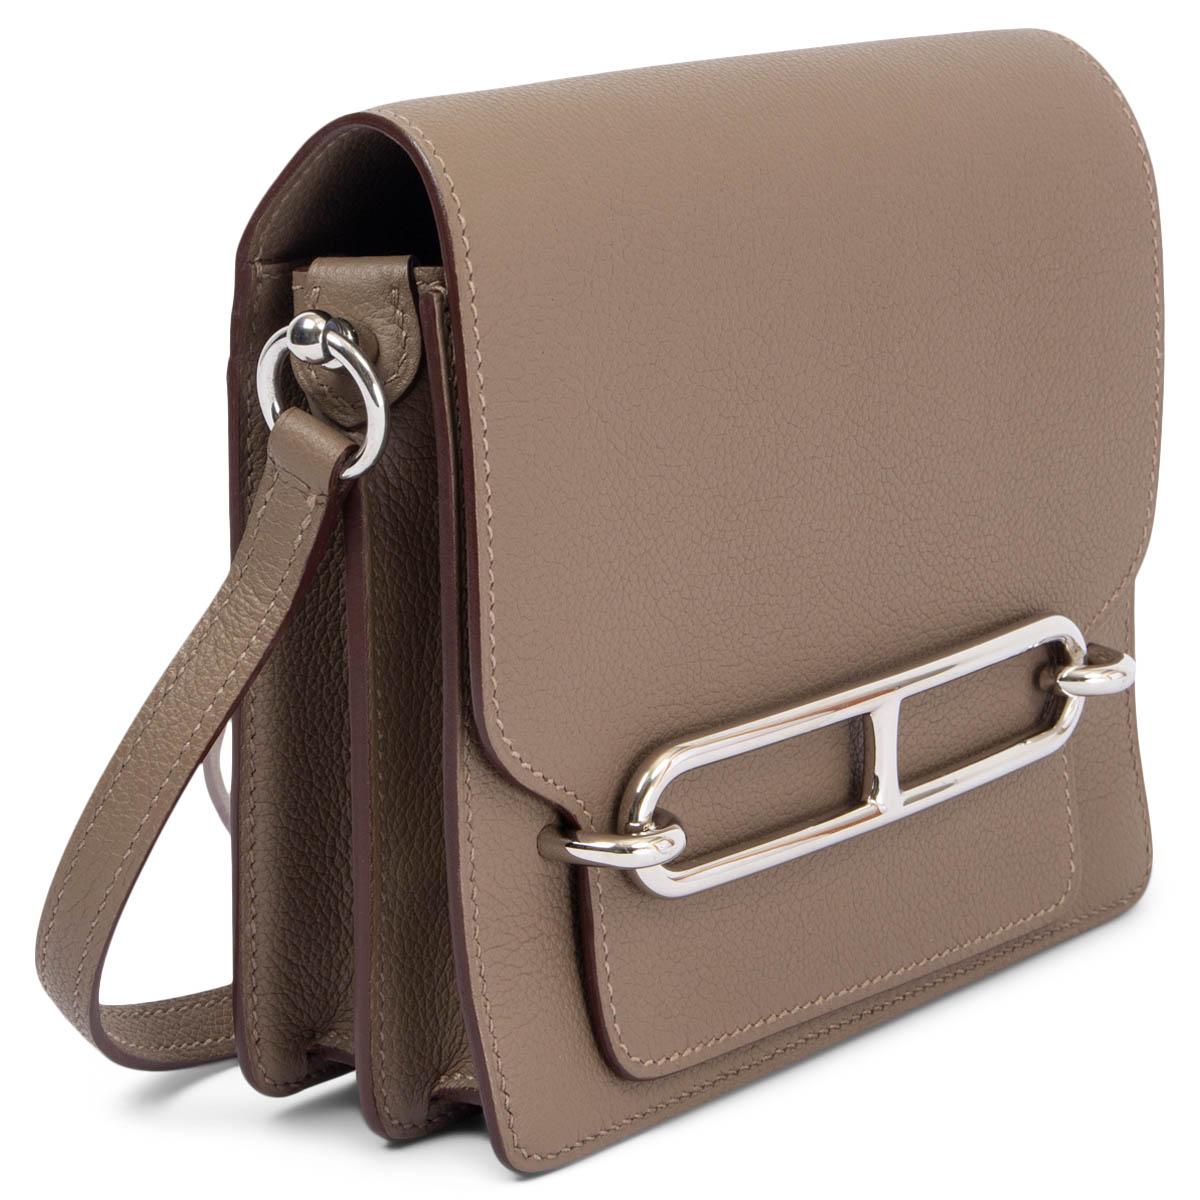 100% authentic Hermes Roulis 18 Mini shoulder bag in Etoupe (taupe) Veau Evercolor leather with palladium hardware. Open pocket on the outside back. Interior is divided in to two compartments by a full size open pocket. Lined in Chevre (goat skin)